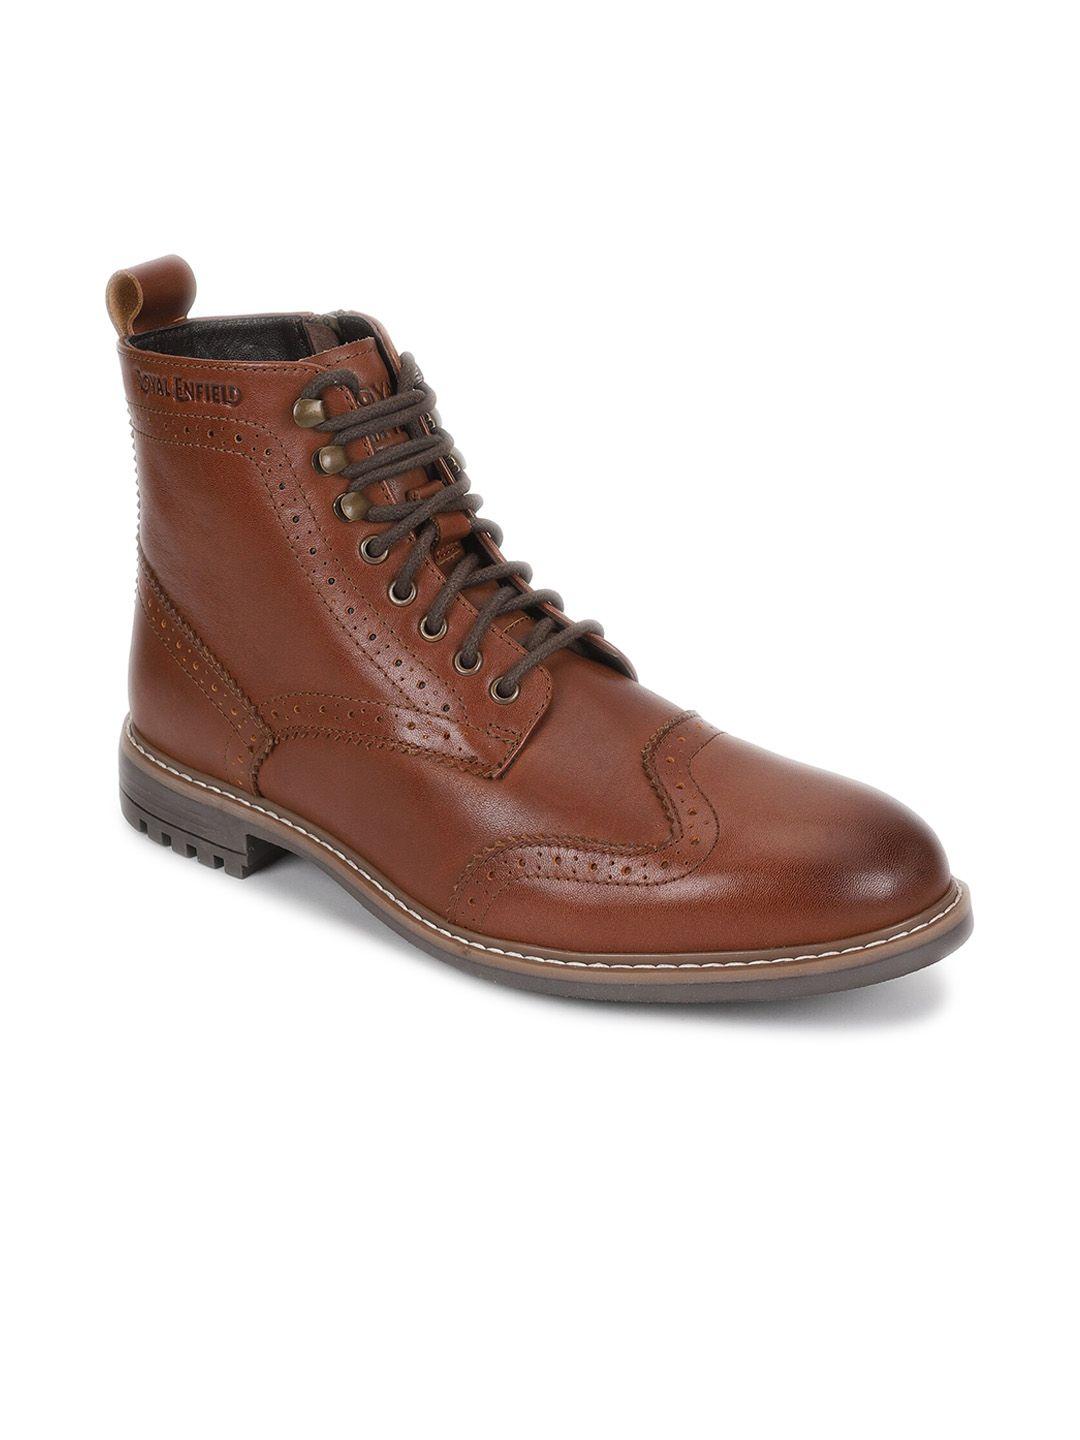 royal enfield men torque perforated leather mid-top regular boots